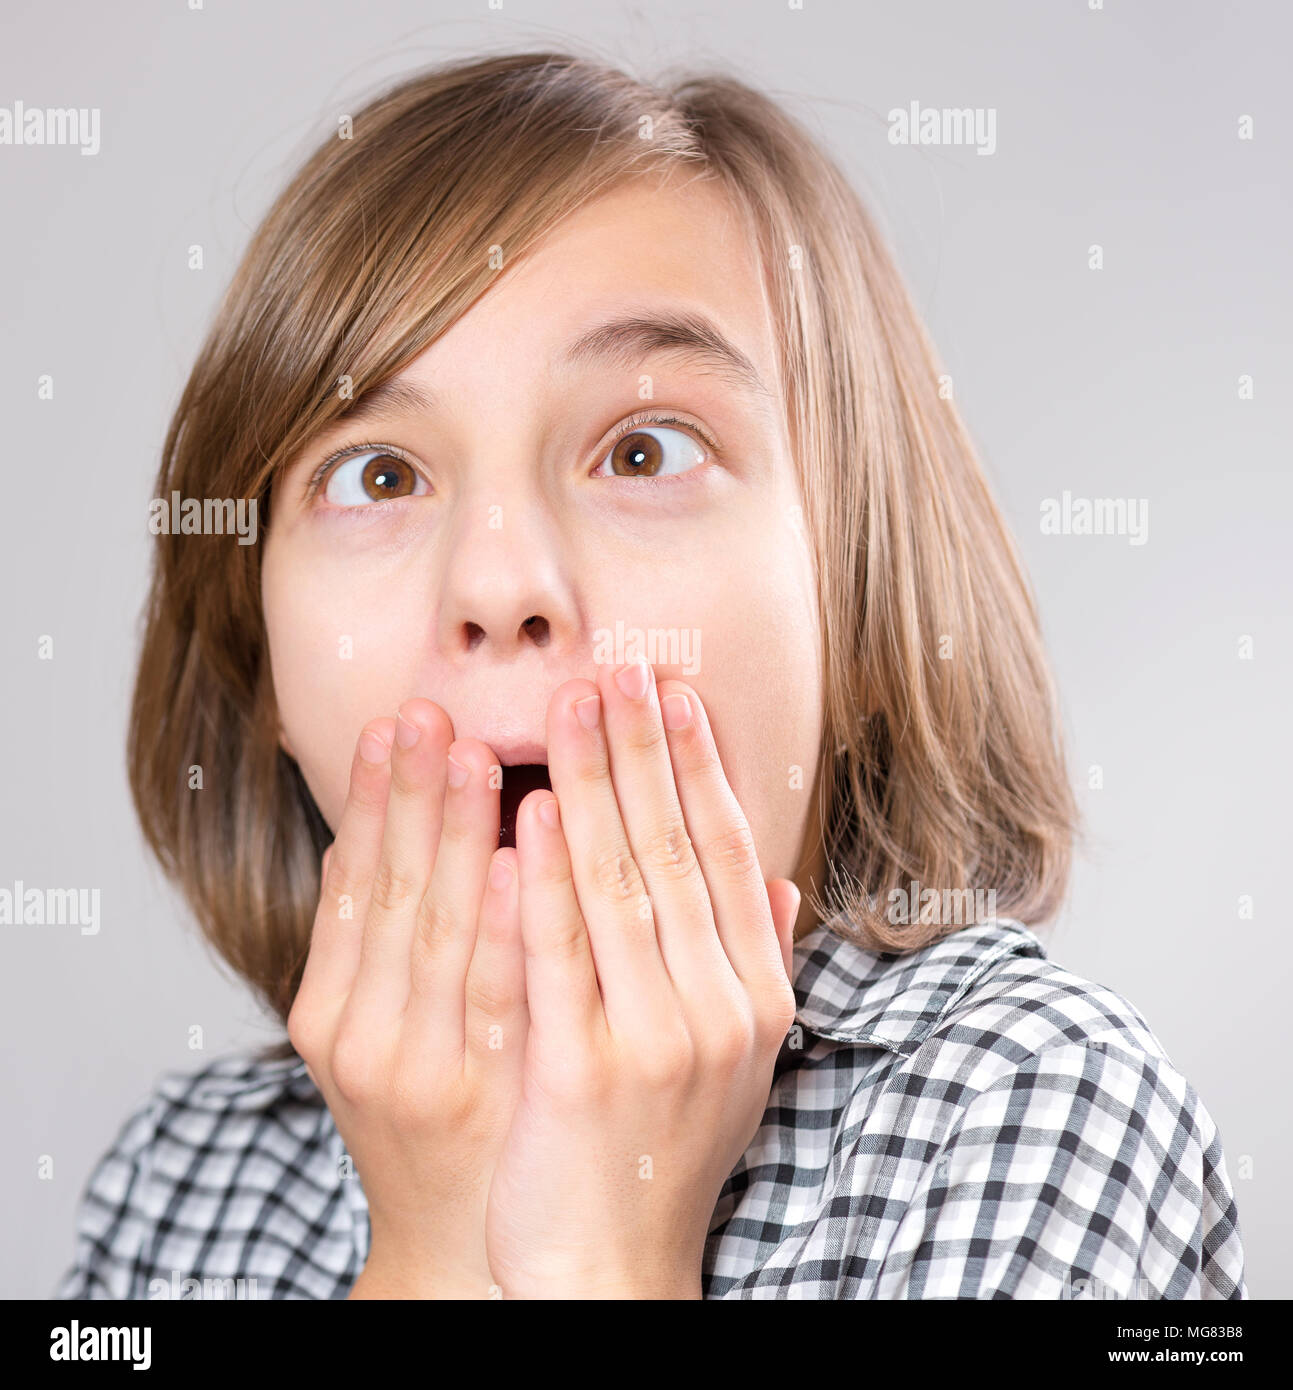 Silly girl making grimace - funny face. Child on gray background. Emotional portrait of caucasian teenager looking at camera. Stock Photo